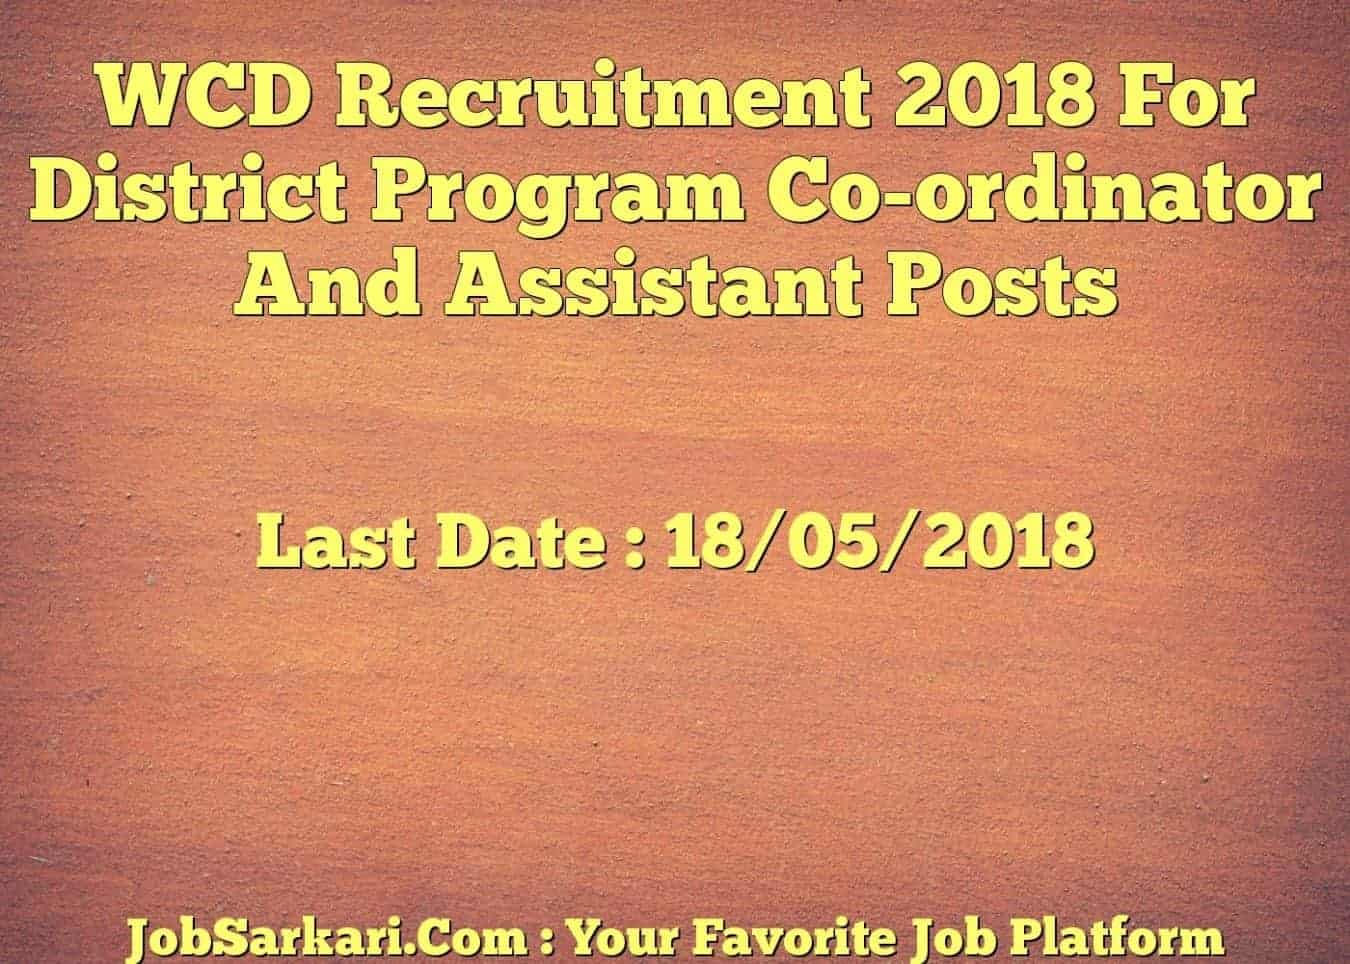 WCD Recruitment 2018 For District Program Co-ordinator And Assistant Posts